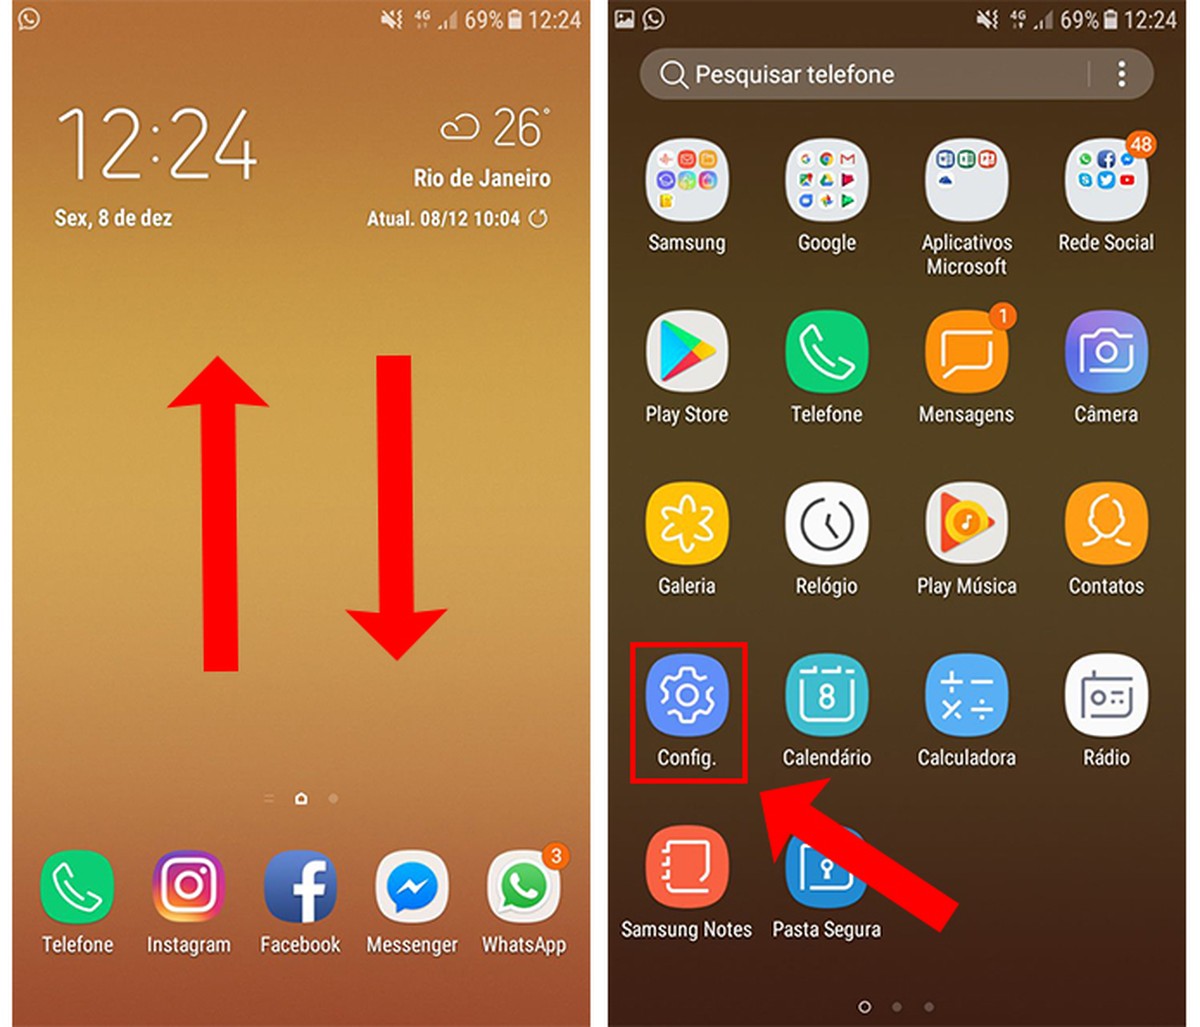 How To Change The Wallpaper Of The Galaxy J5 Pro Cell Phone Tech2